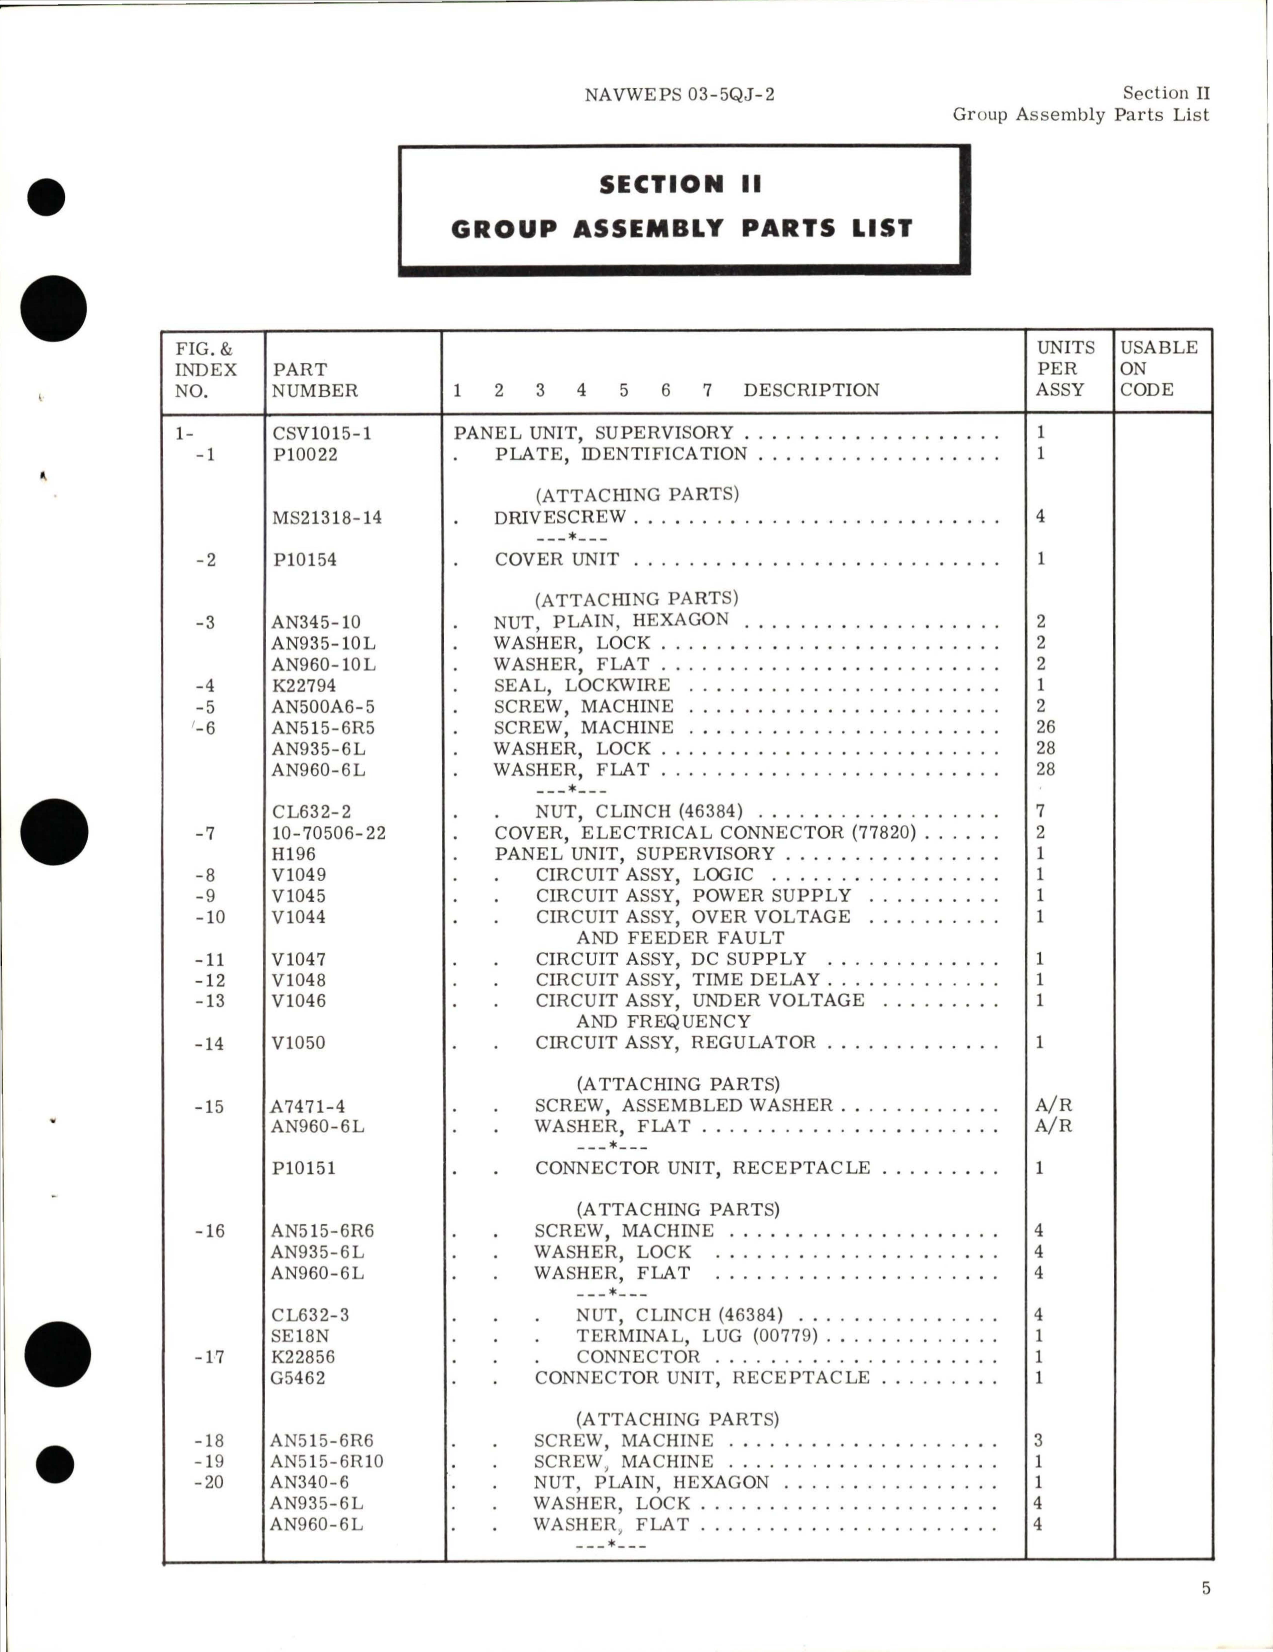 Sample page 7 from AirCorps Library document: Illustrated Parts Breakdown for Supervisory Panel Unit - Part CSV1015-1